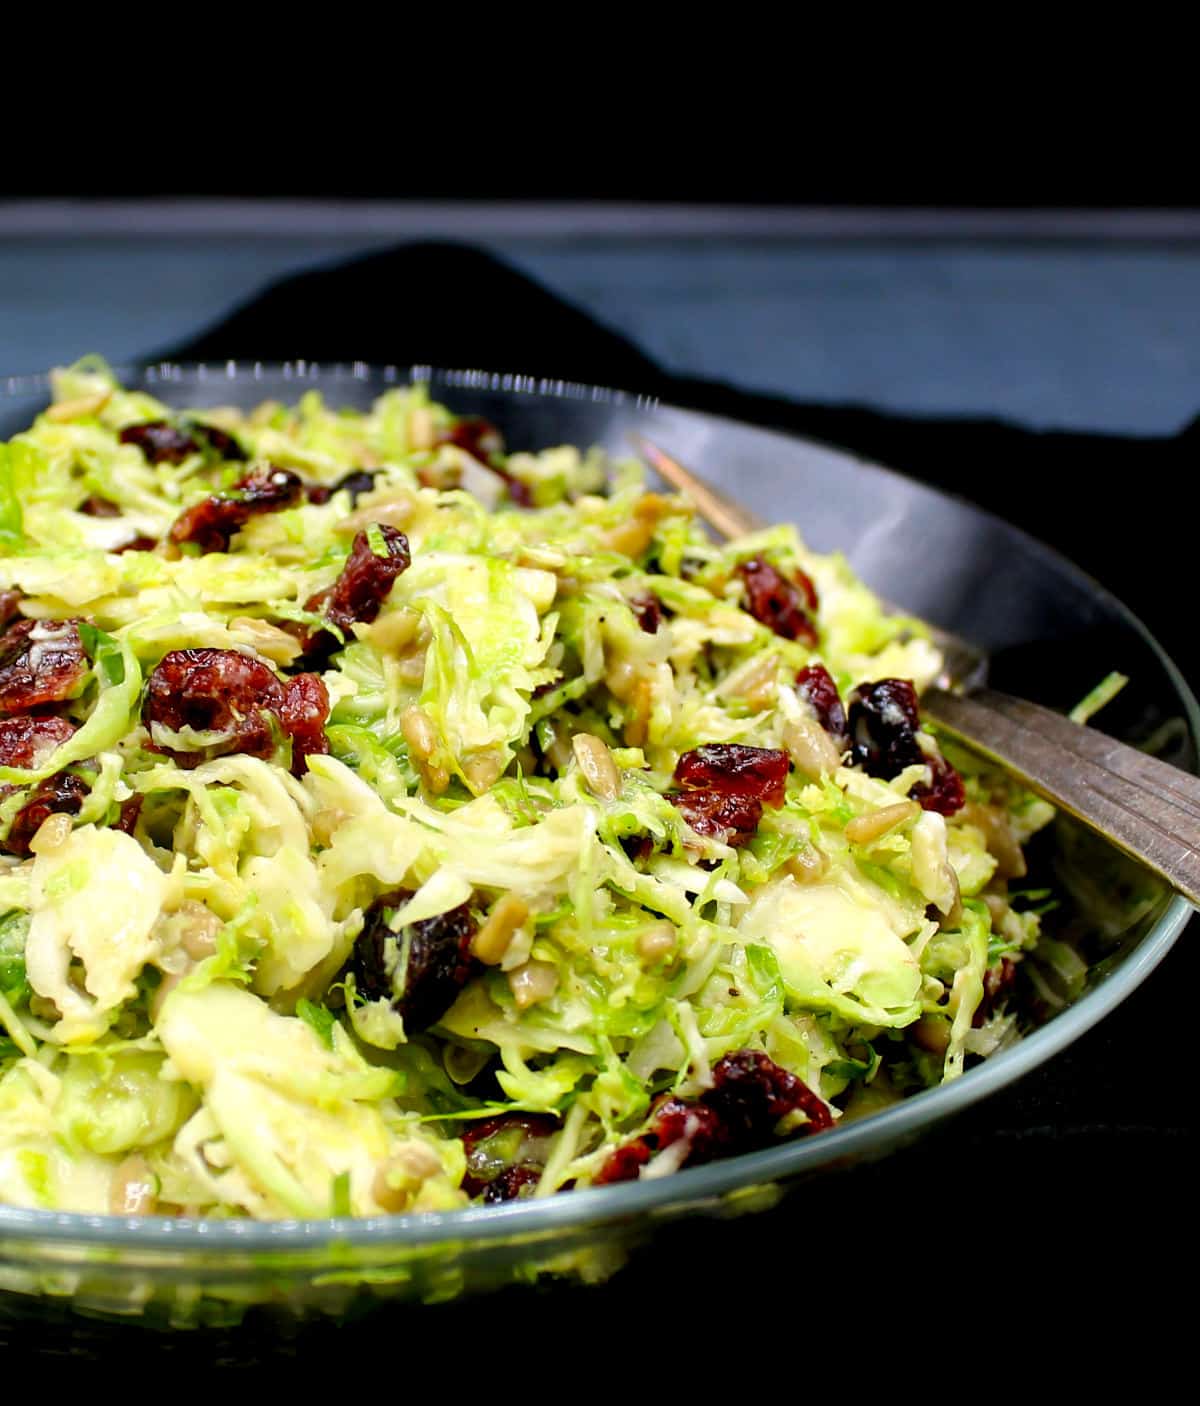 A front partial shot of vegan brussels sprouts salad in a glass bowl with forks.